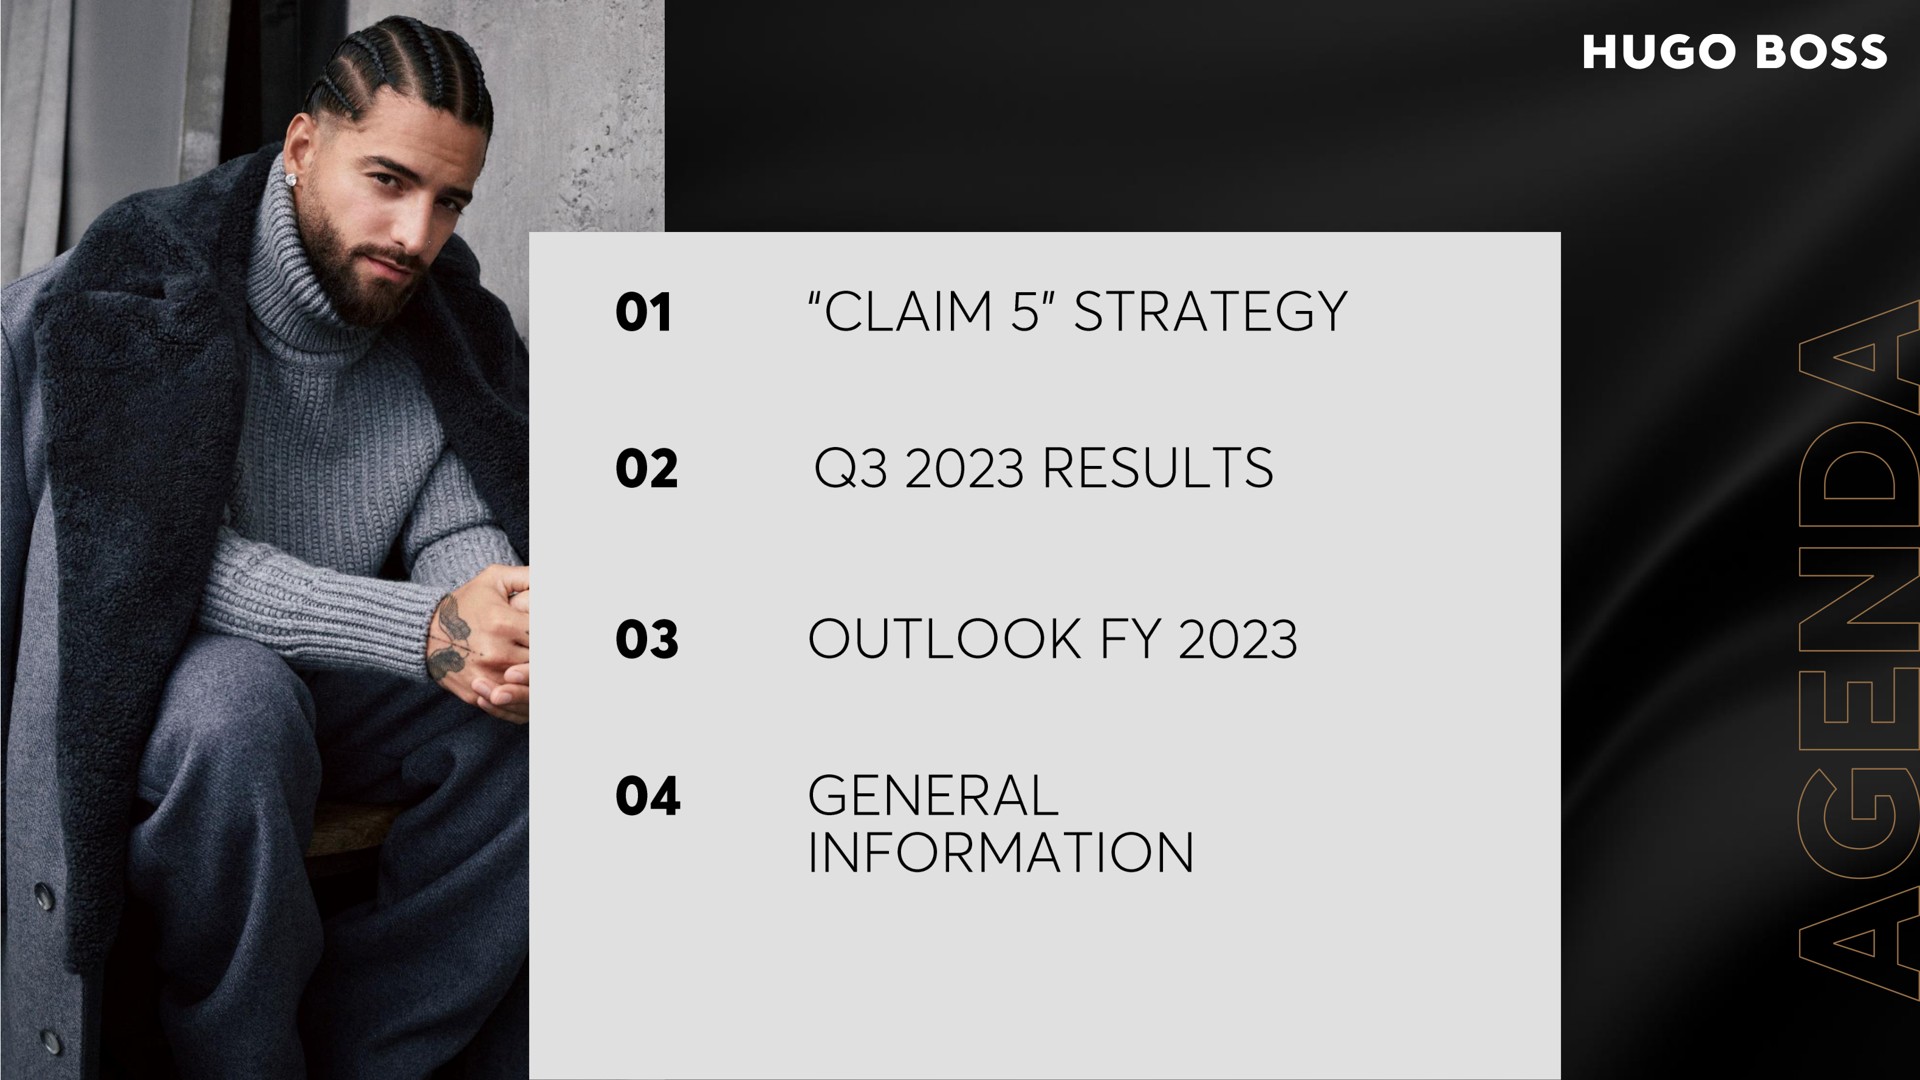 boss a claim strategy results outlook information general | Hugo Boss